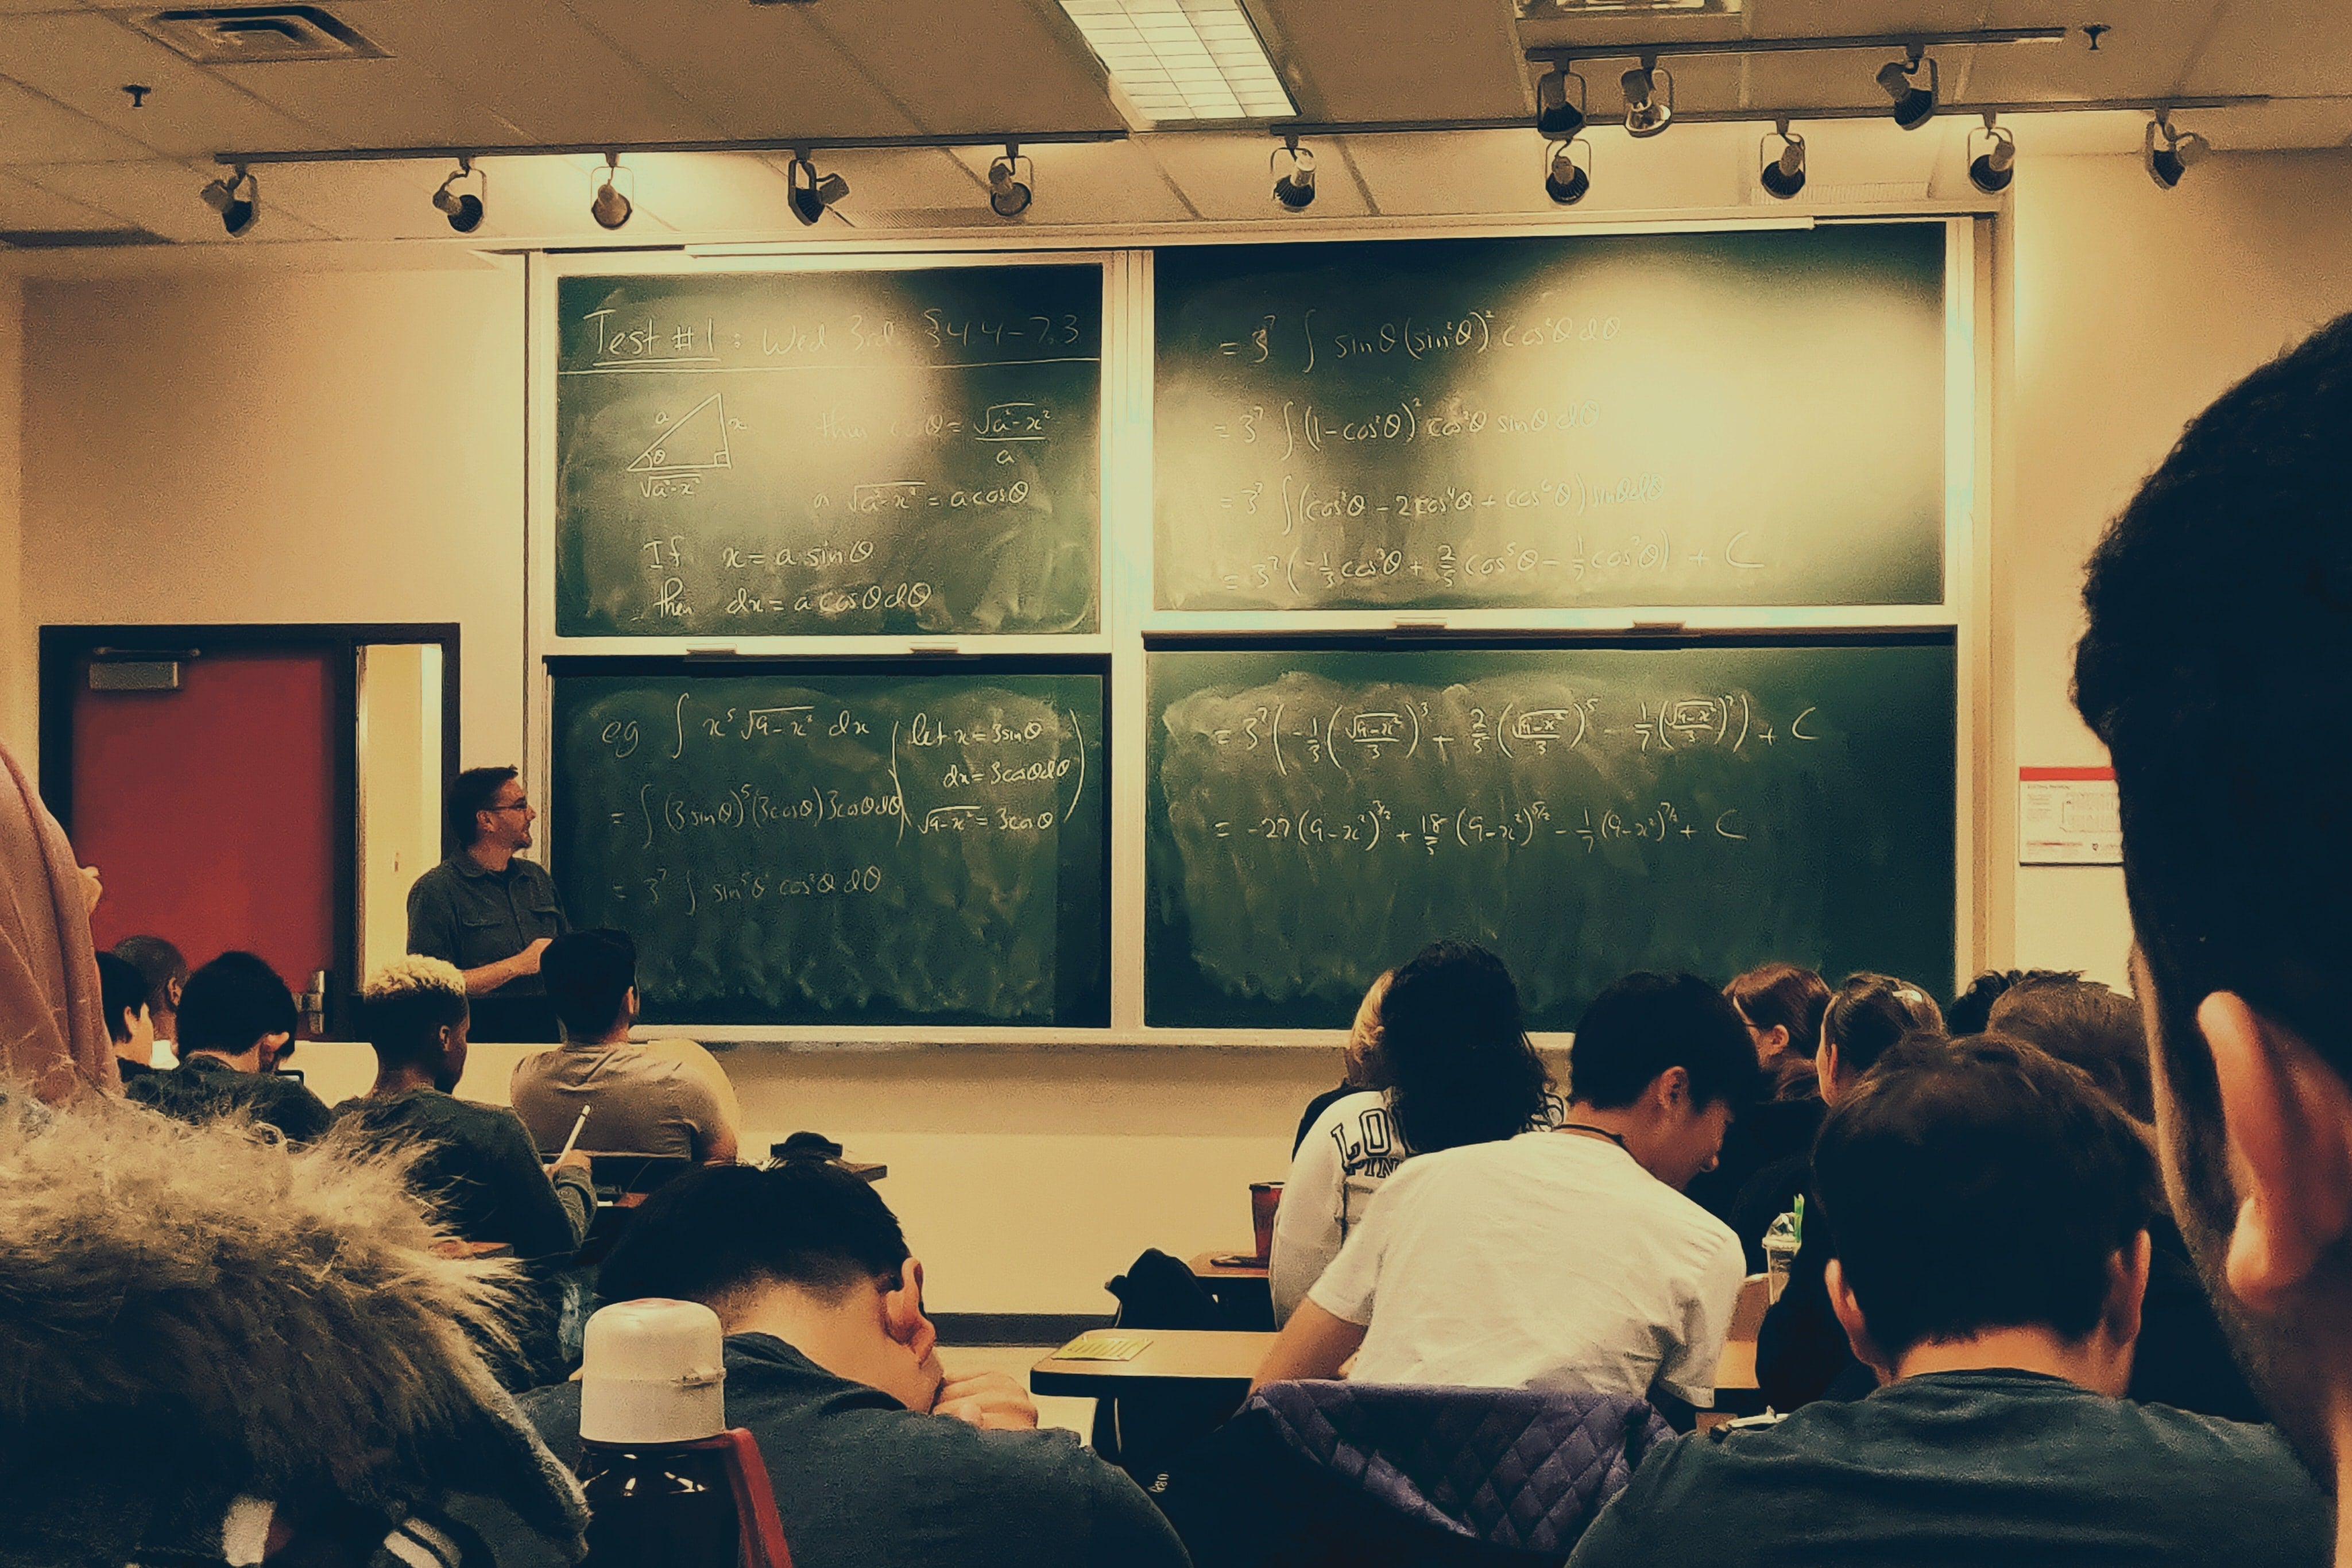 A professor stands in front of a chalkboard and lectures to students sitting at desks in a classroom